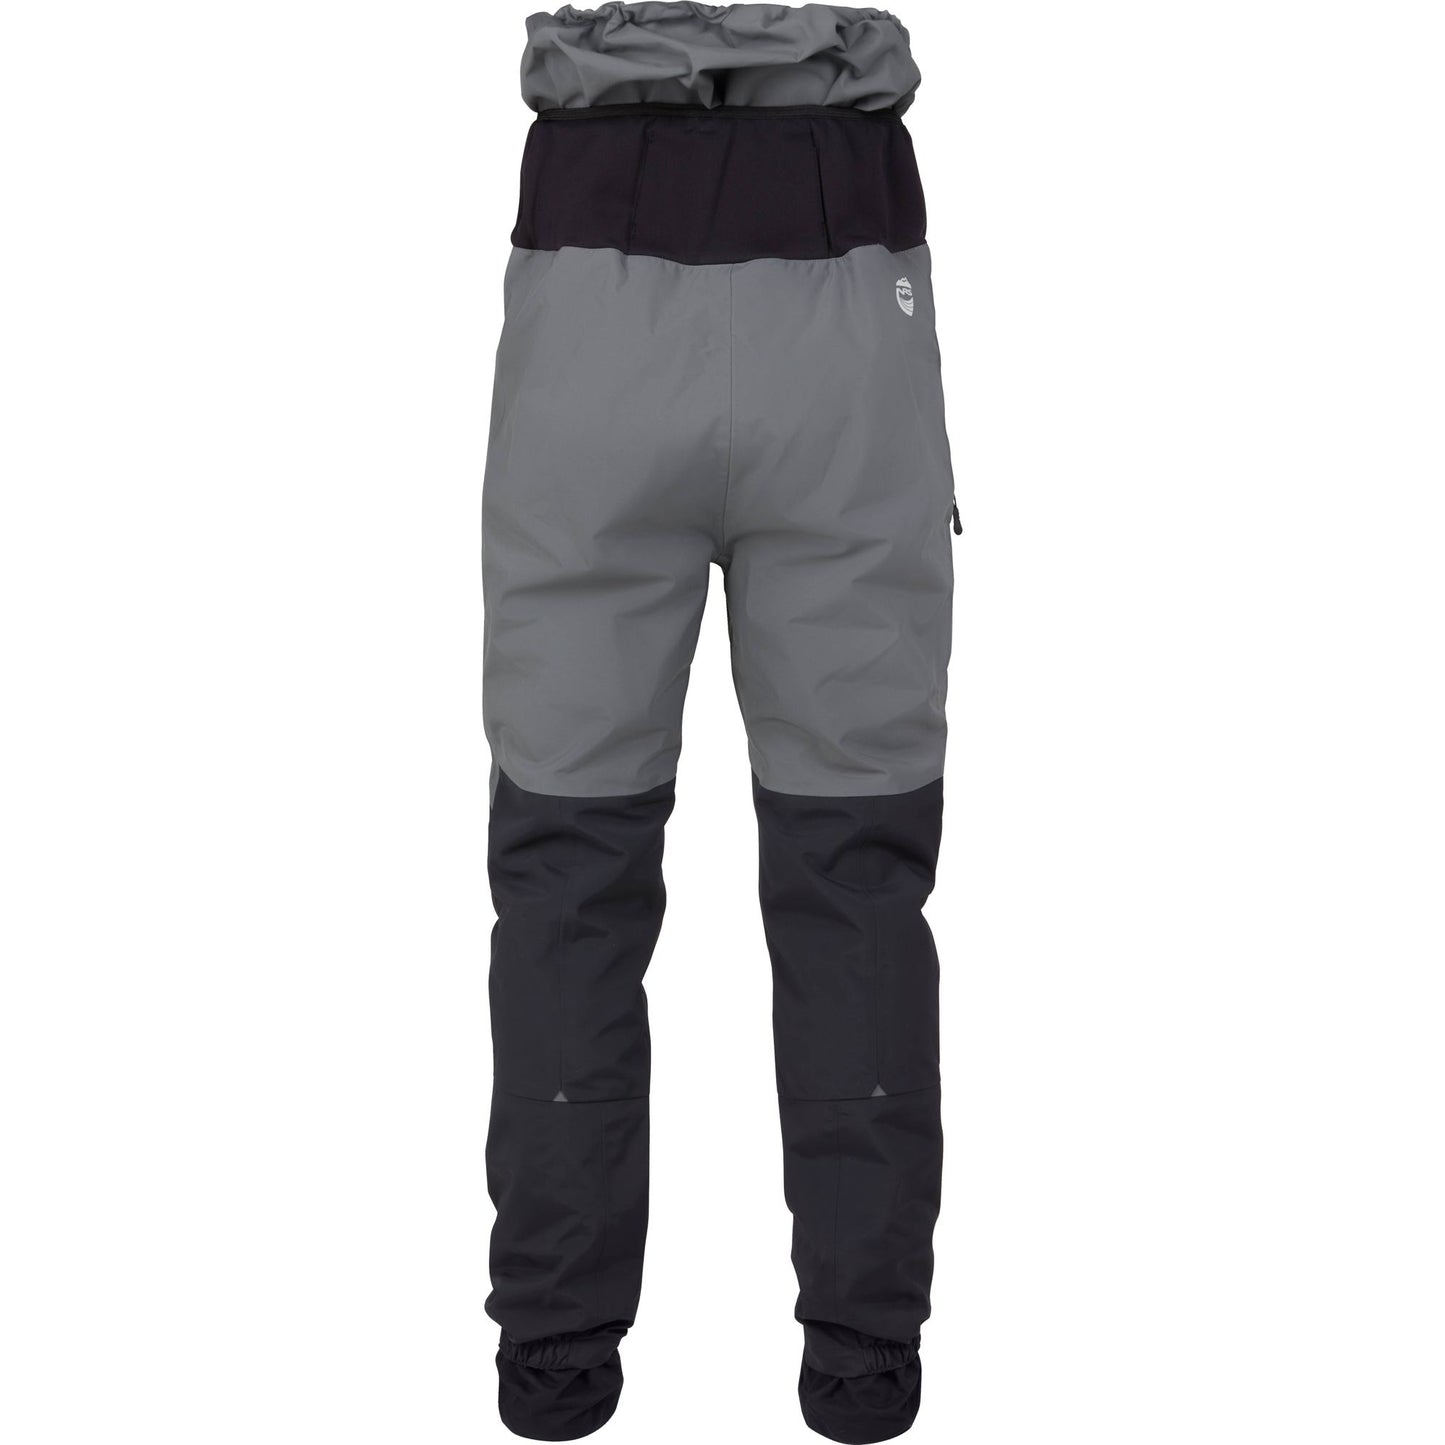 NRS Freefall Dry Pants, hombre